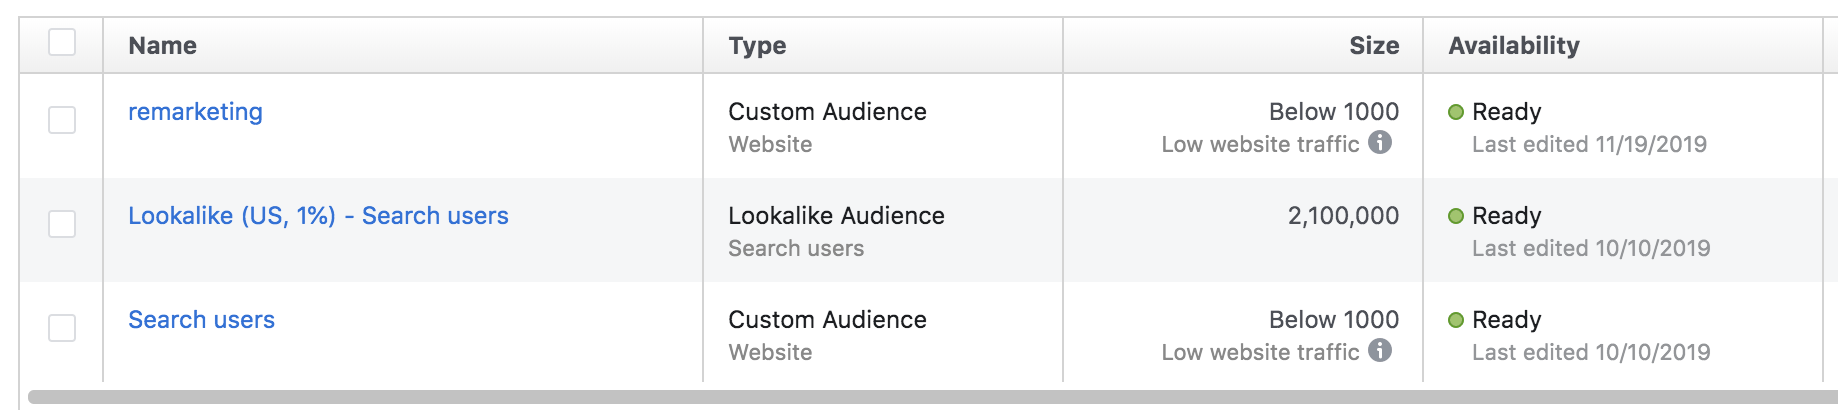 comparing audience size of lookalike, remarketing, and search audience Facebook campaigns